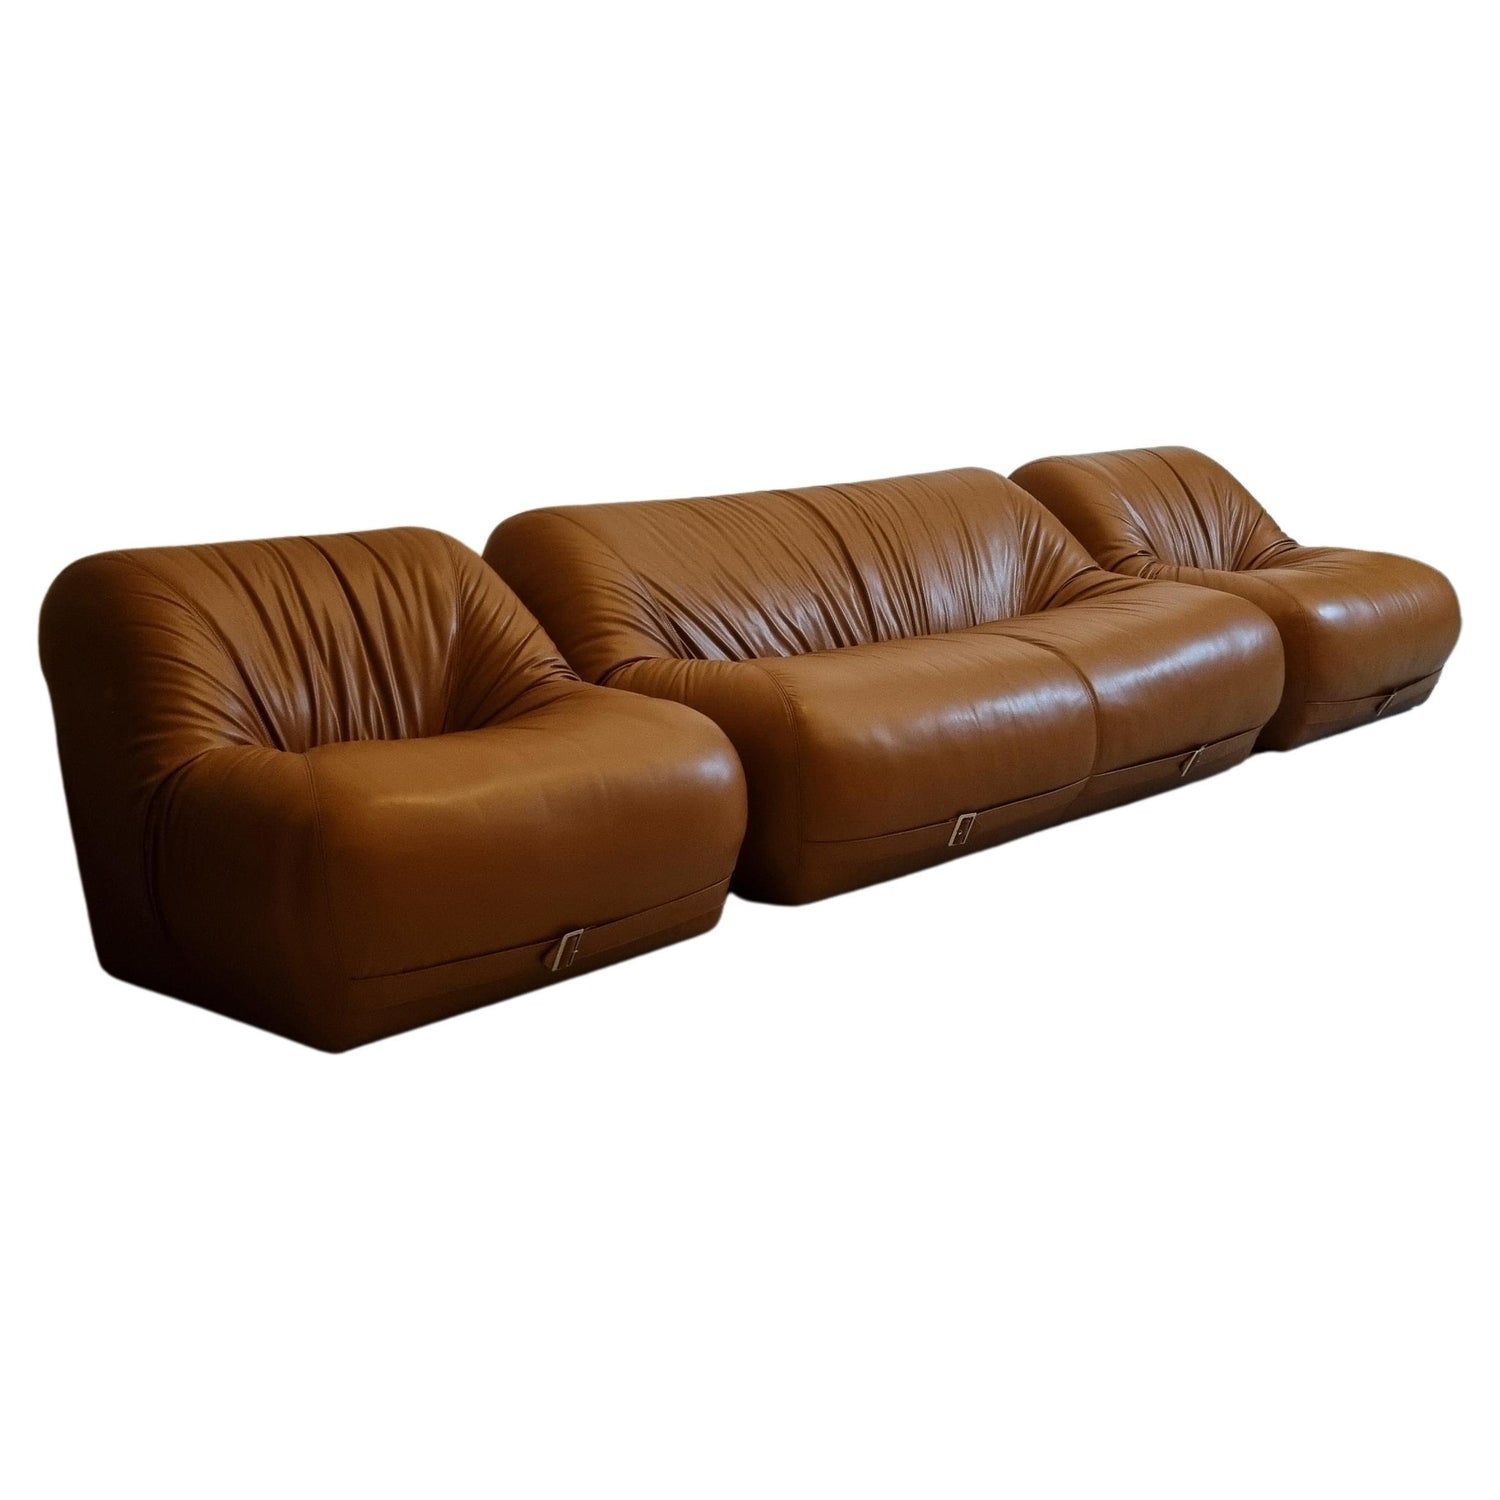 60er 70er Jahre Rare Modular 70s Italy Design Space For 60s Sale Age Sofa 1stDibs Modul at Couch